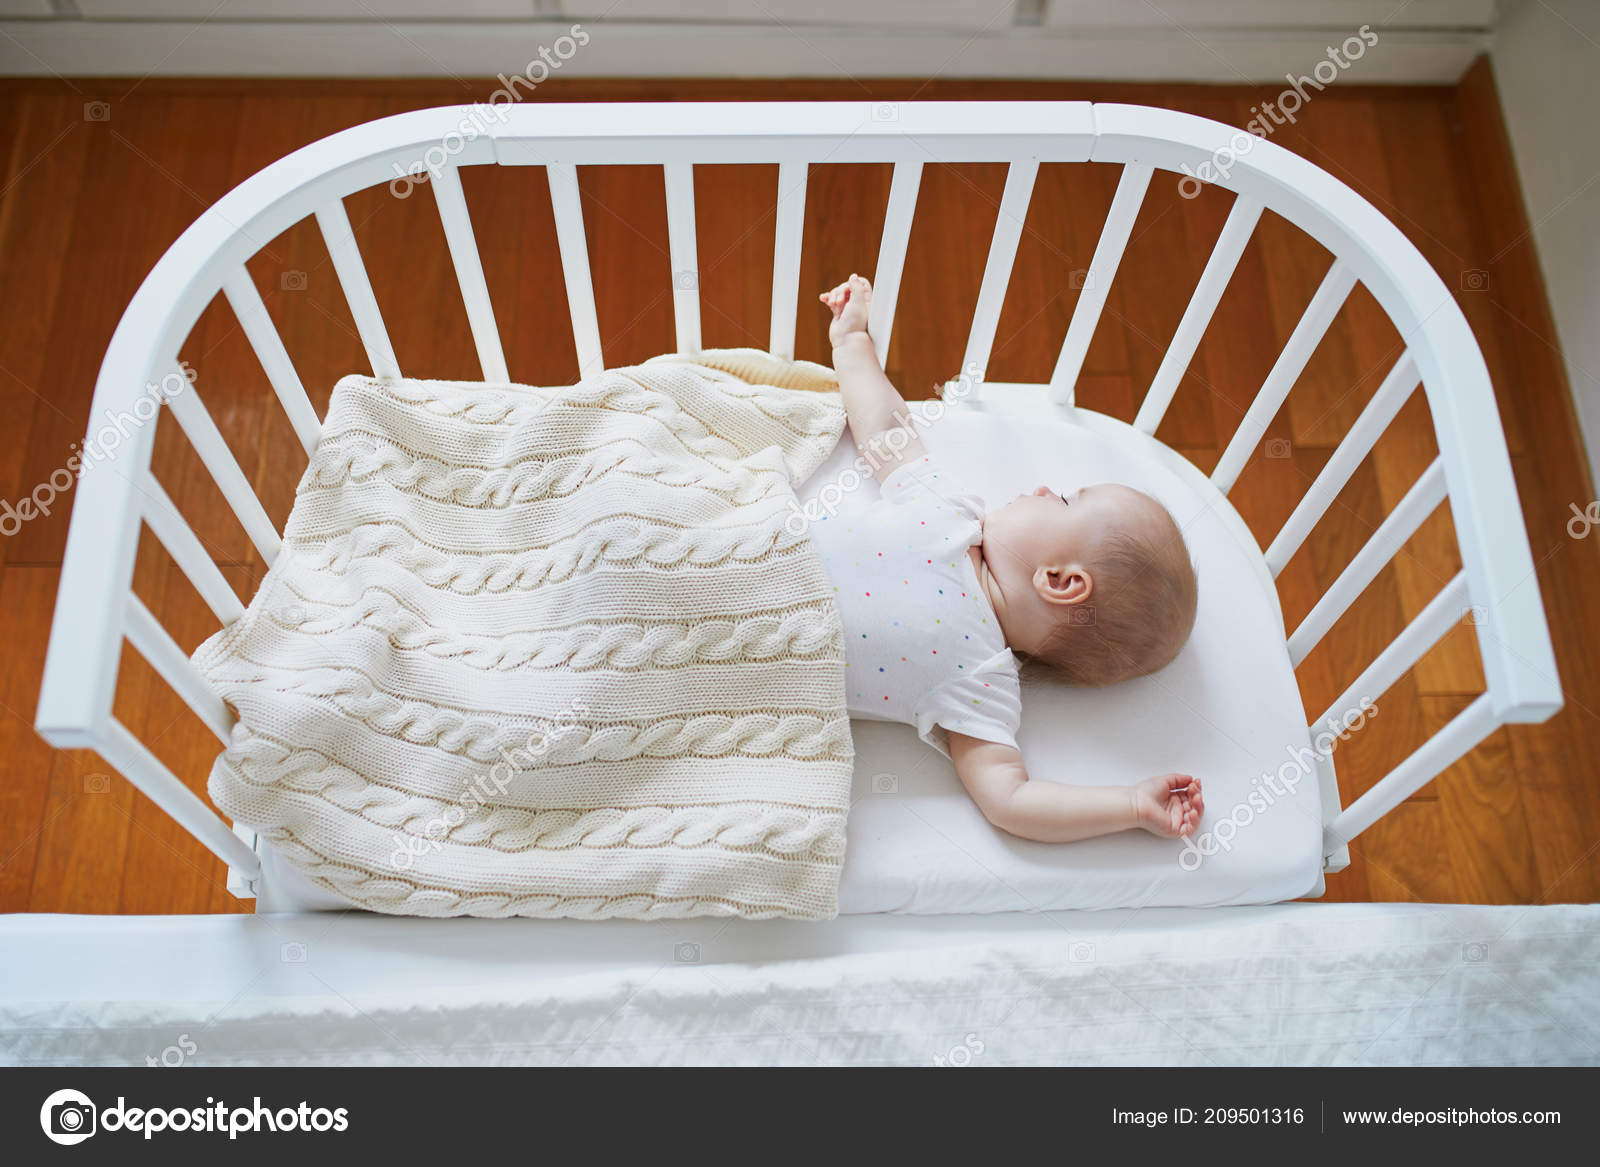 attached bed for baby